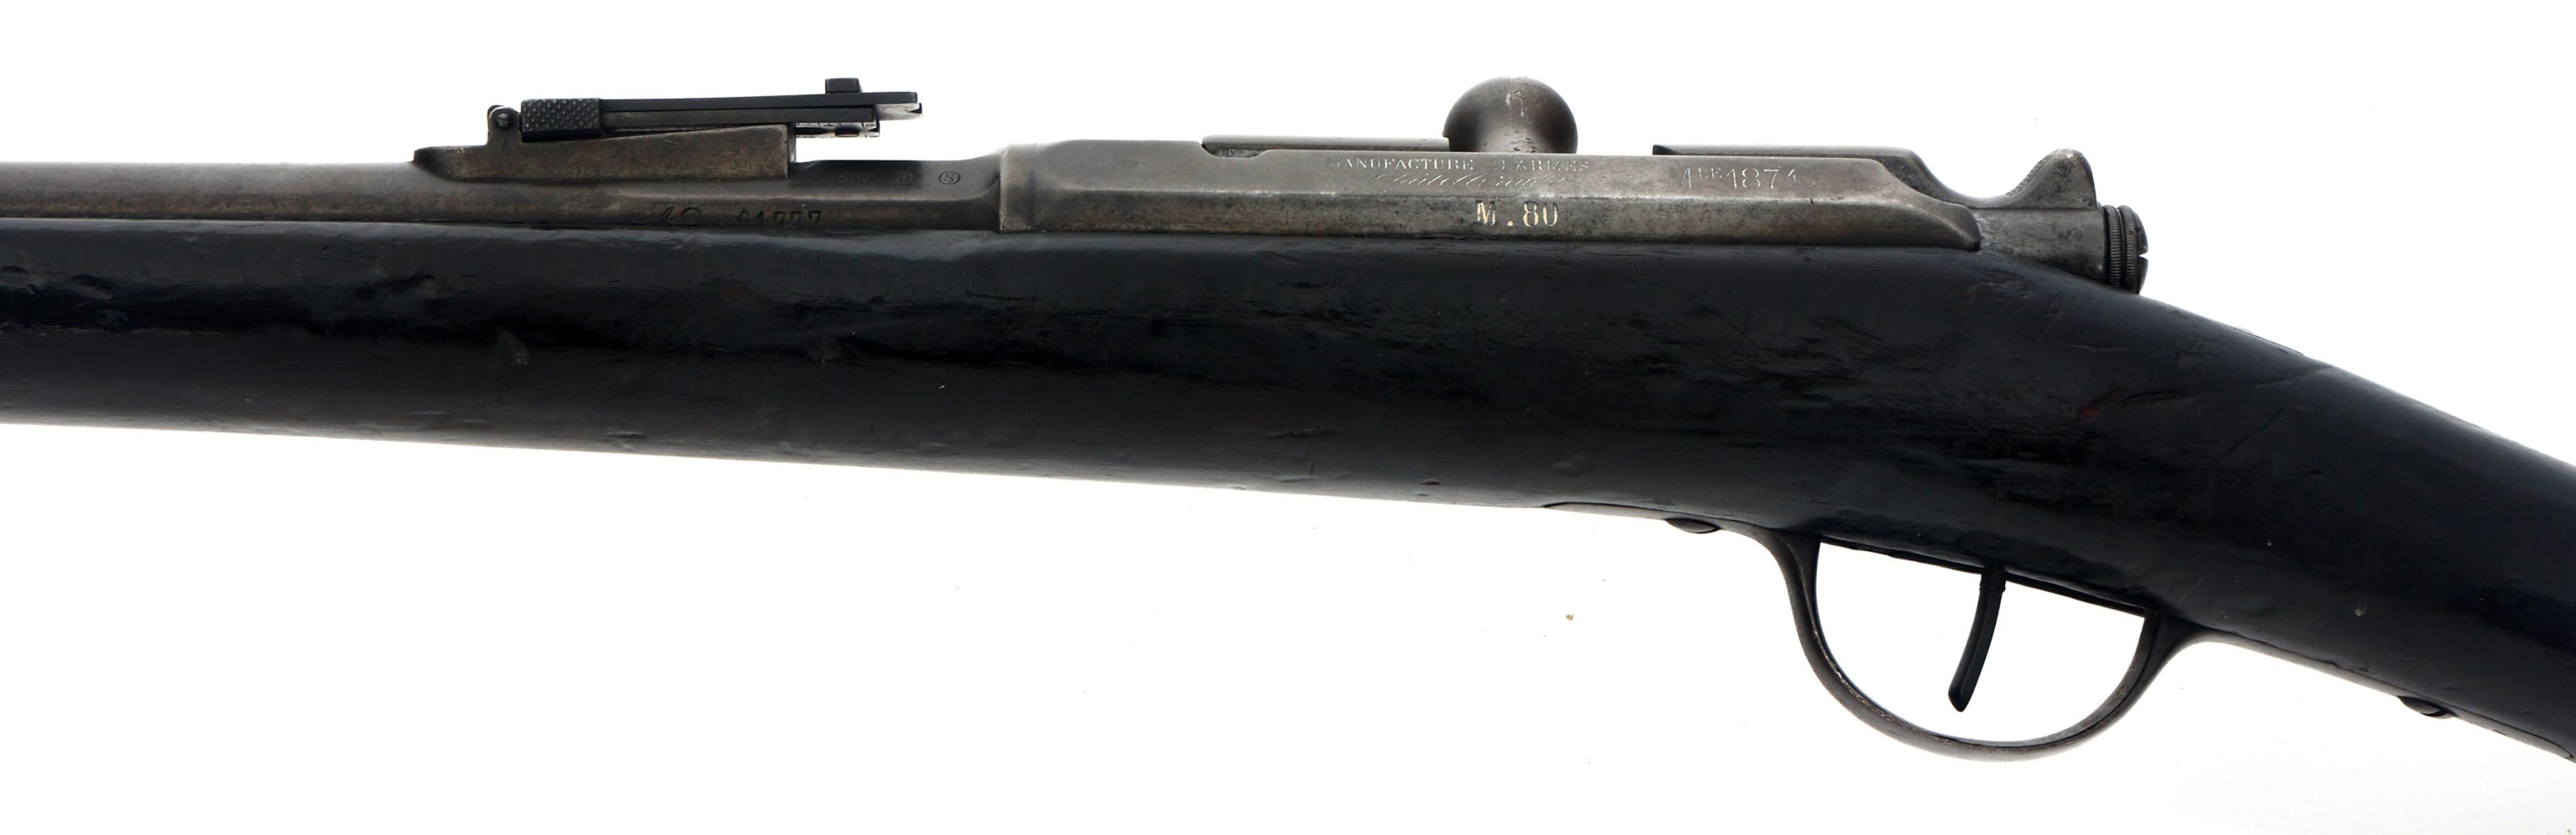 FRENCH CHATELLERAULT MLE 1874 M80 8x50mm CAL RIFLE